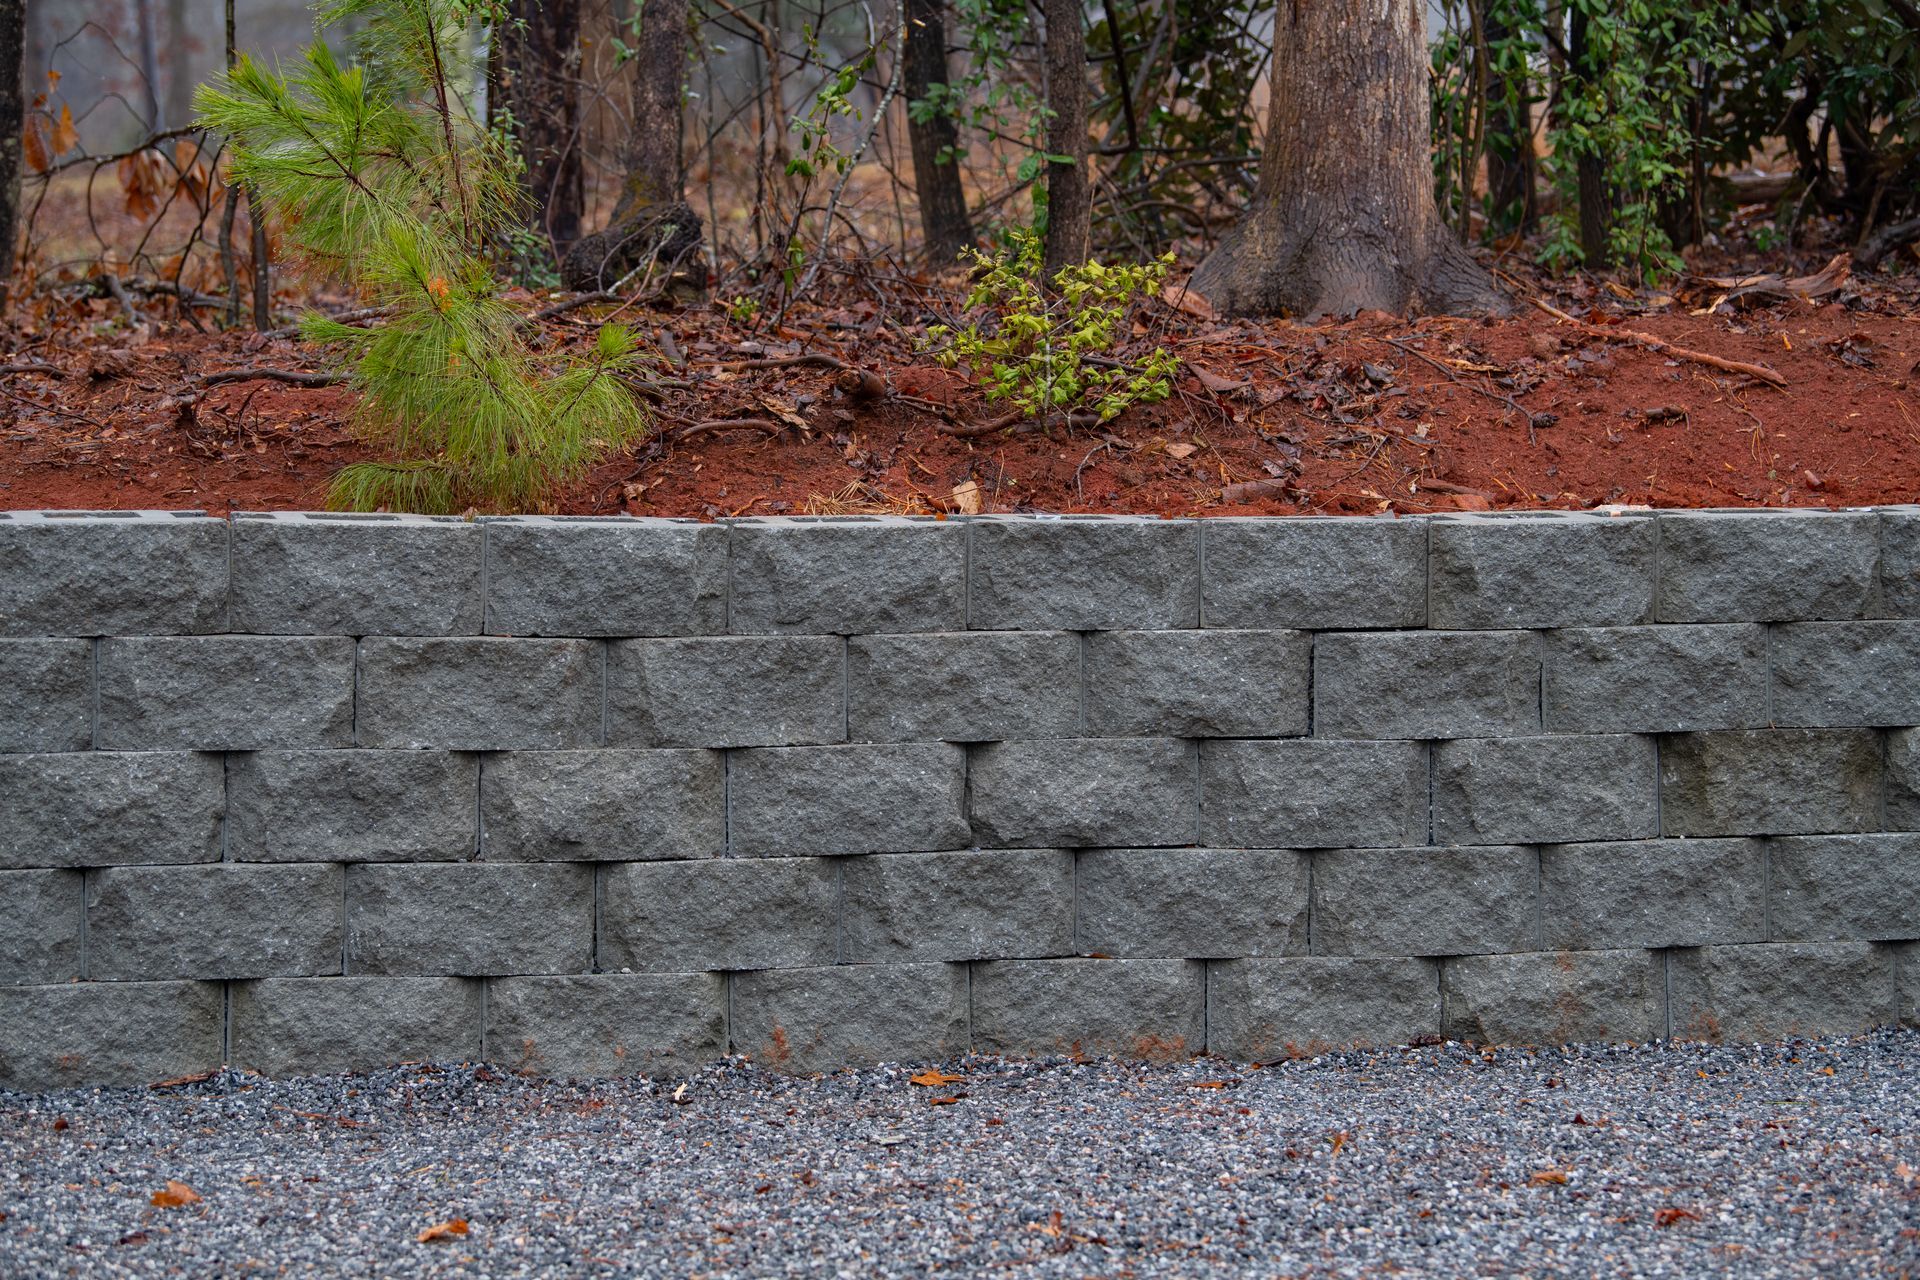 a brick wall is surrounded by gravel and trees in the background .